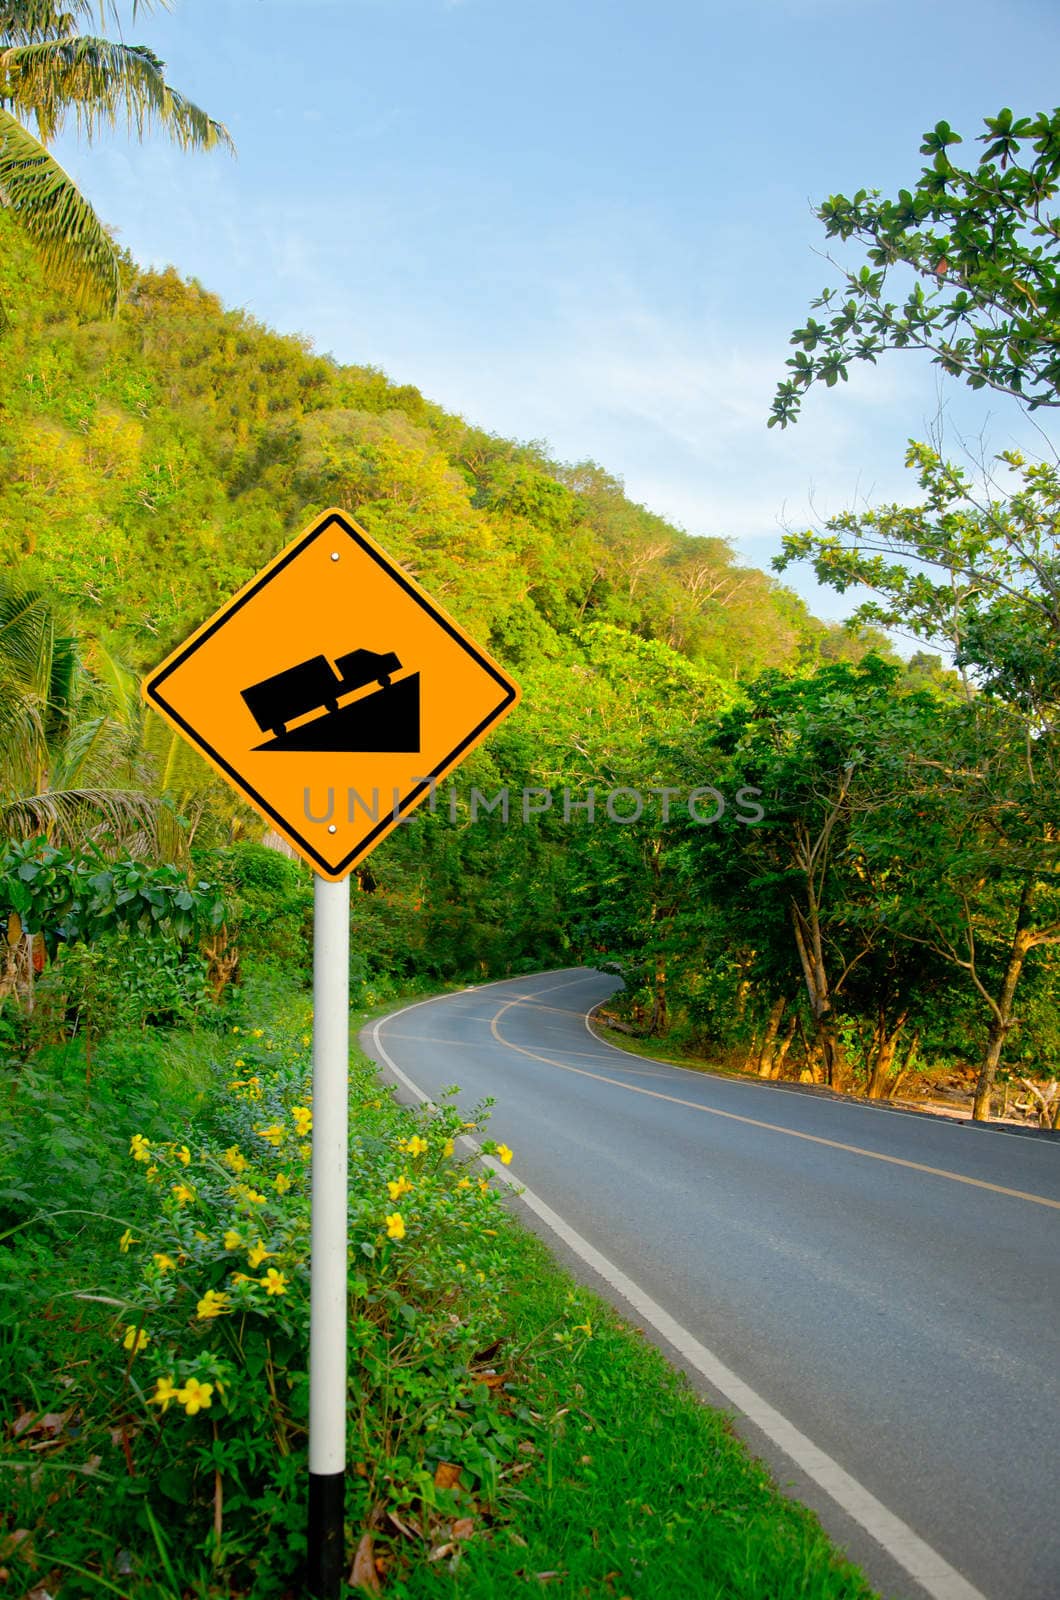 Steep grade hill traffic sign on road in thailand